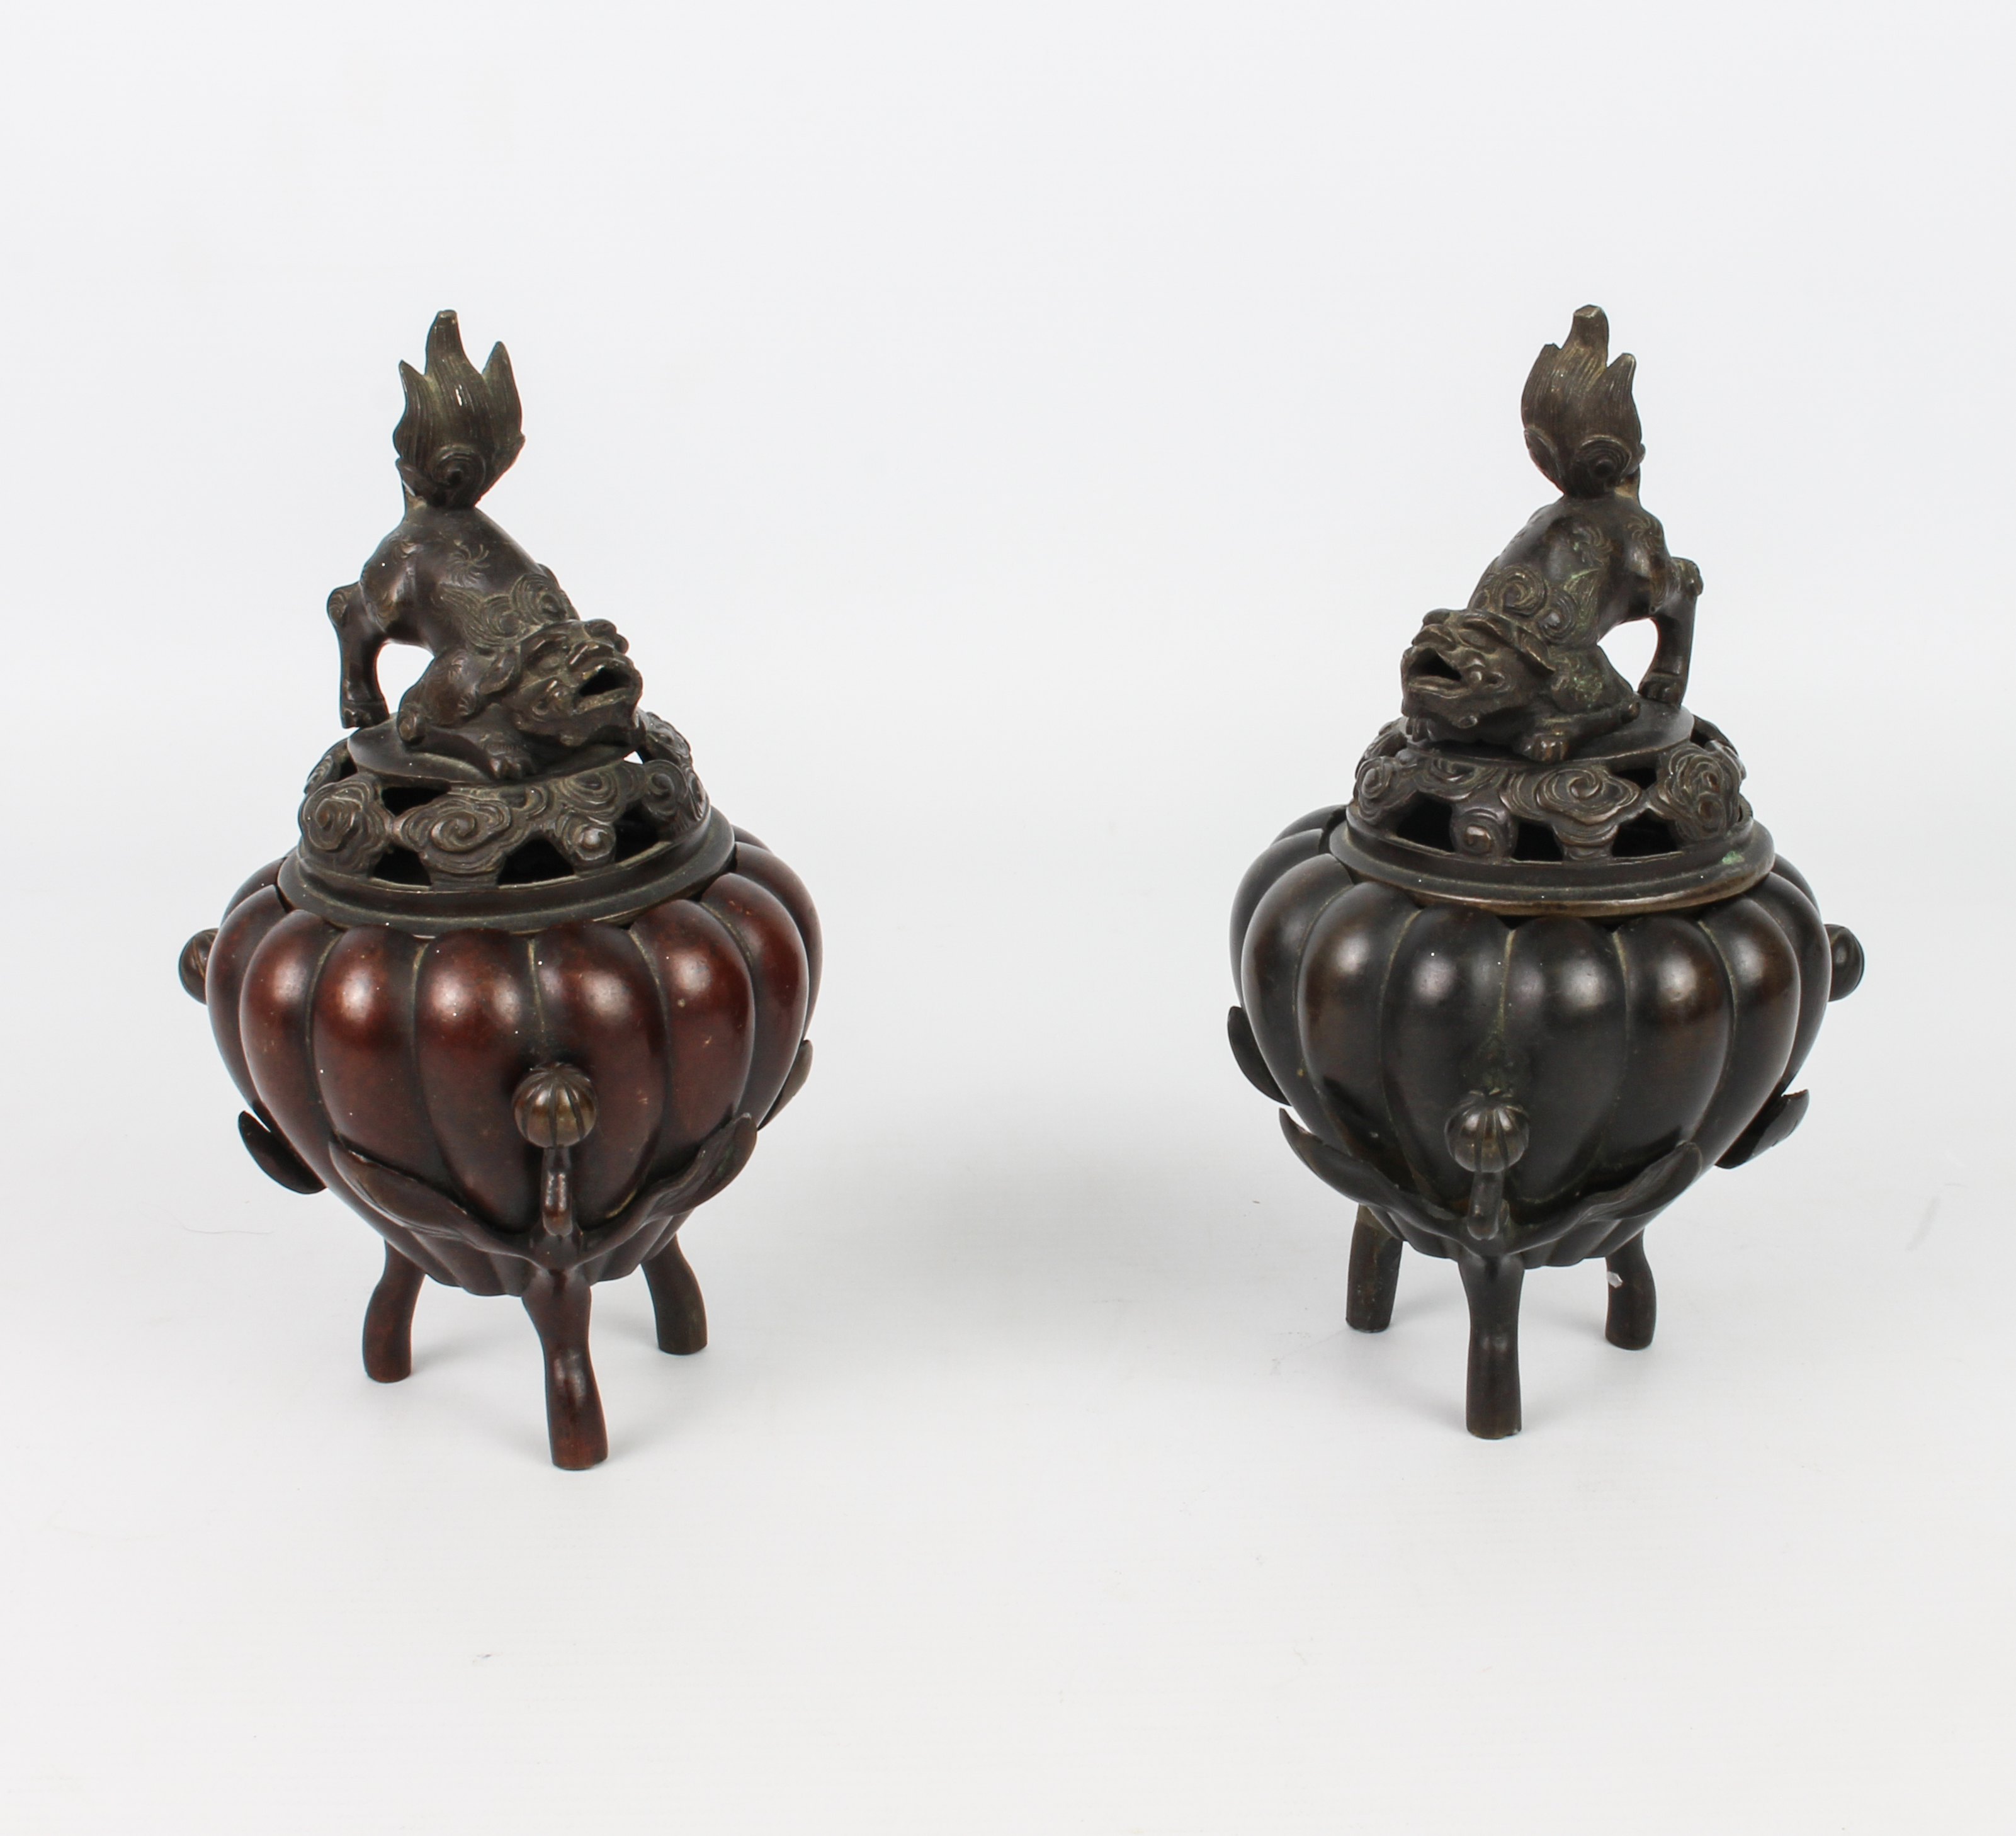 A pair of Chinese bronze tripod censers - probably early 20th century, of pumpkin or gourd form,